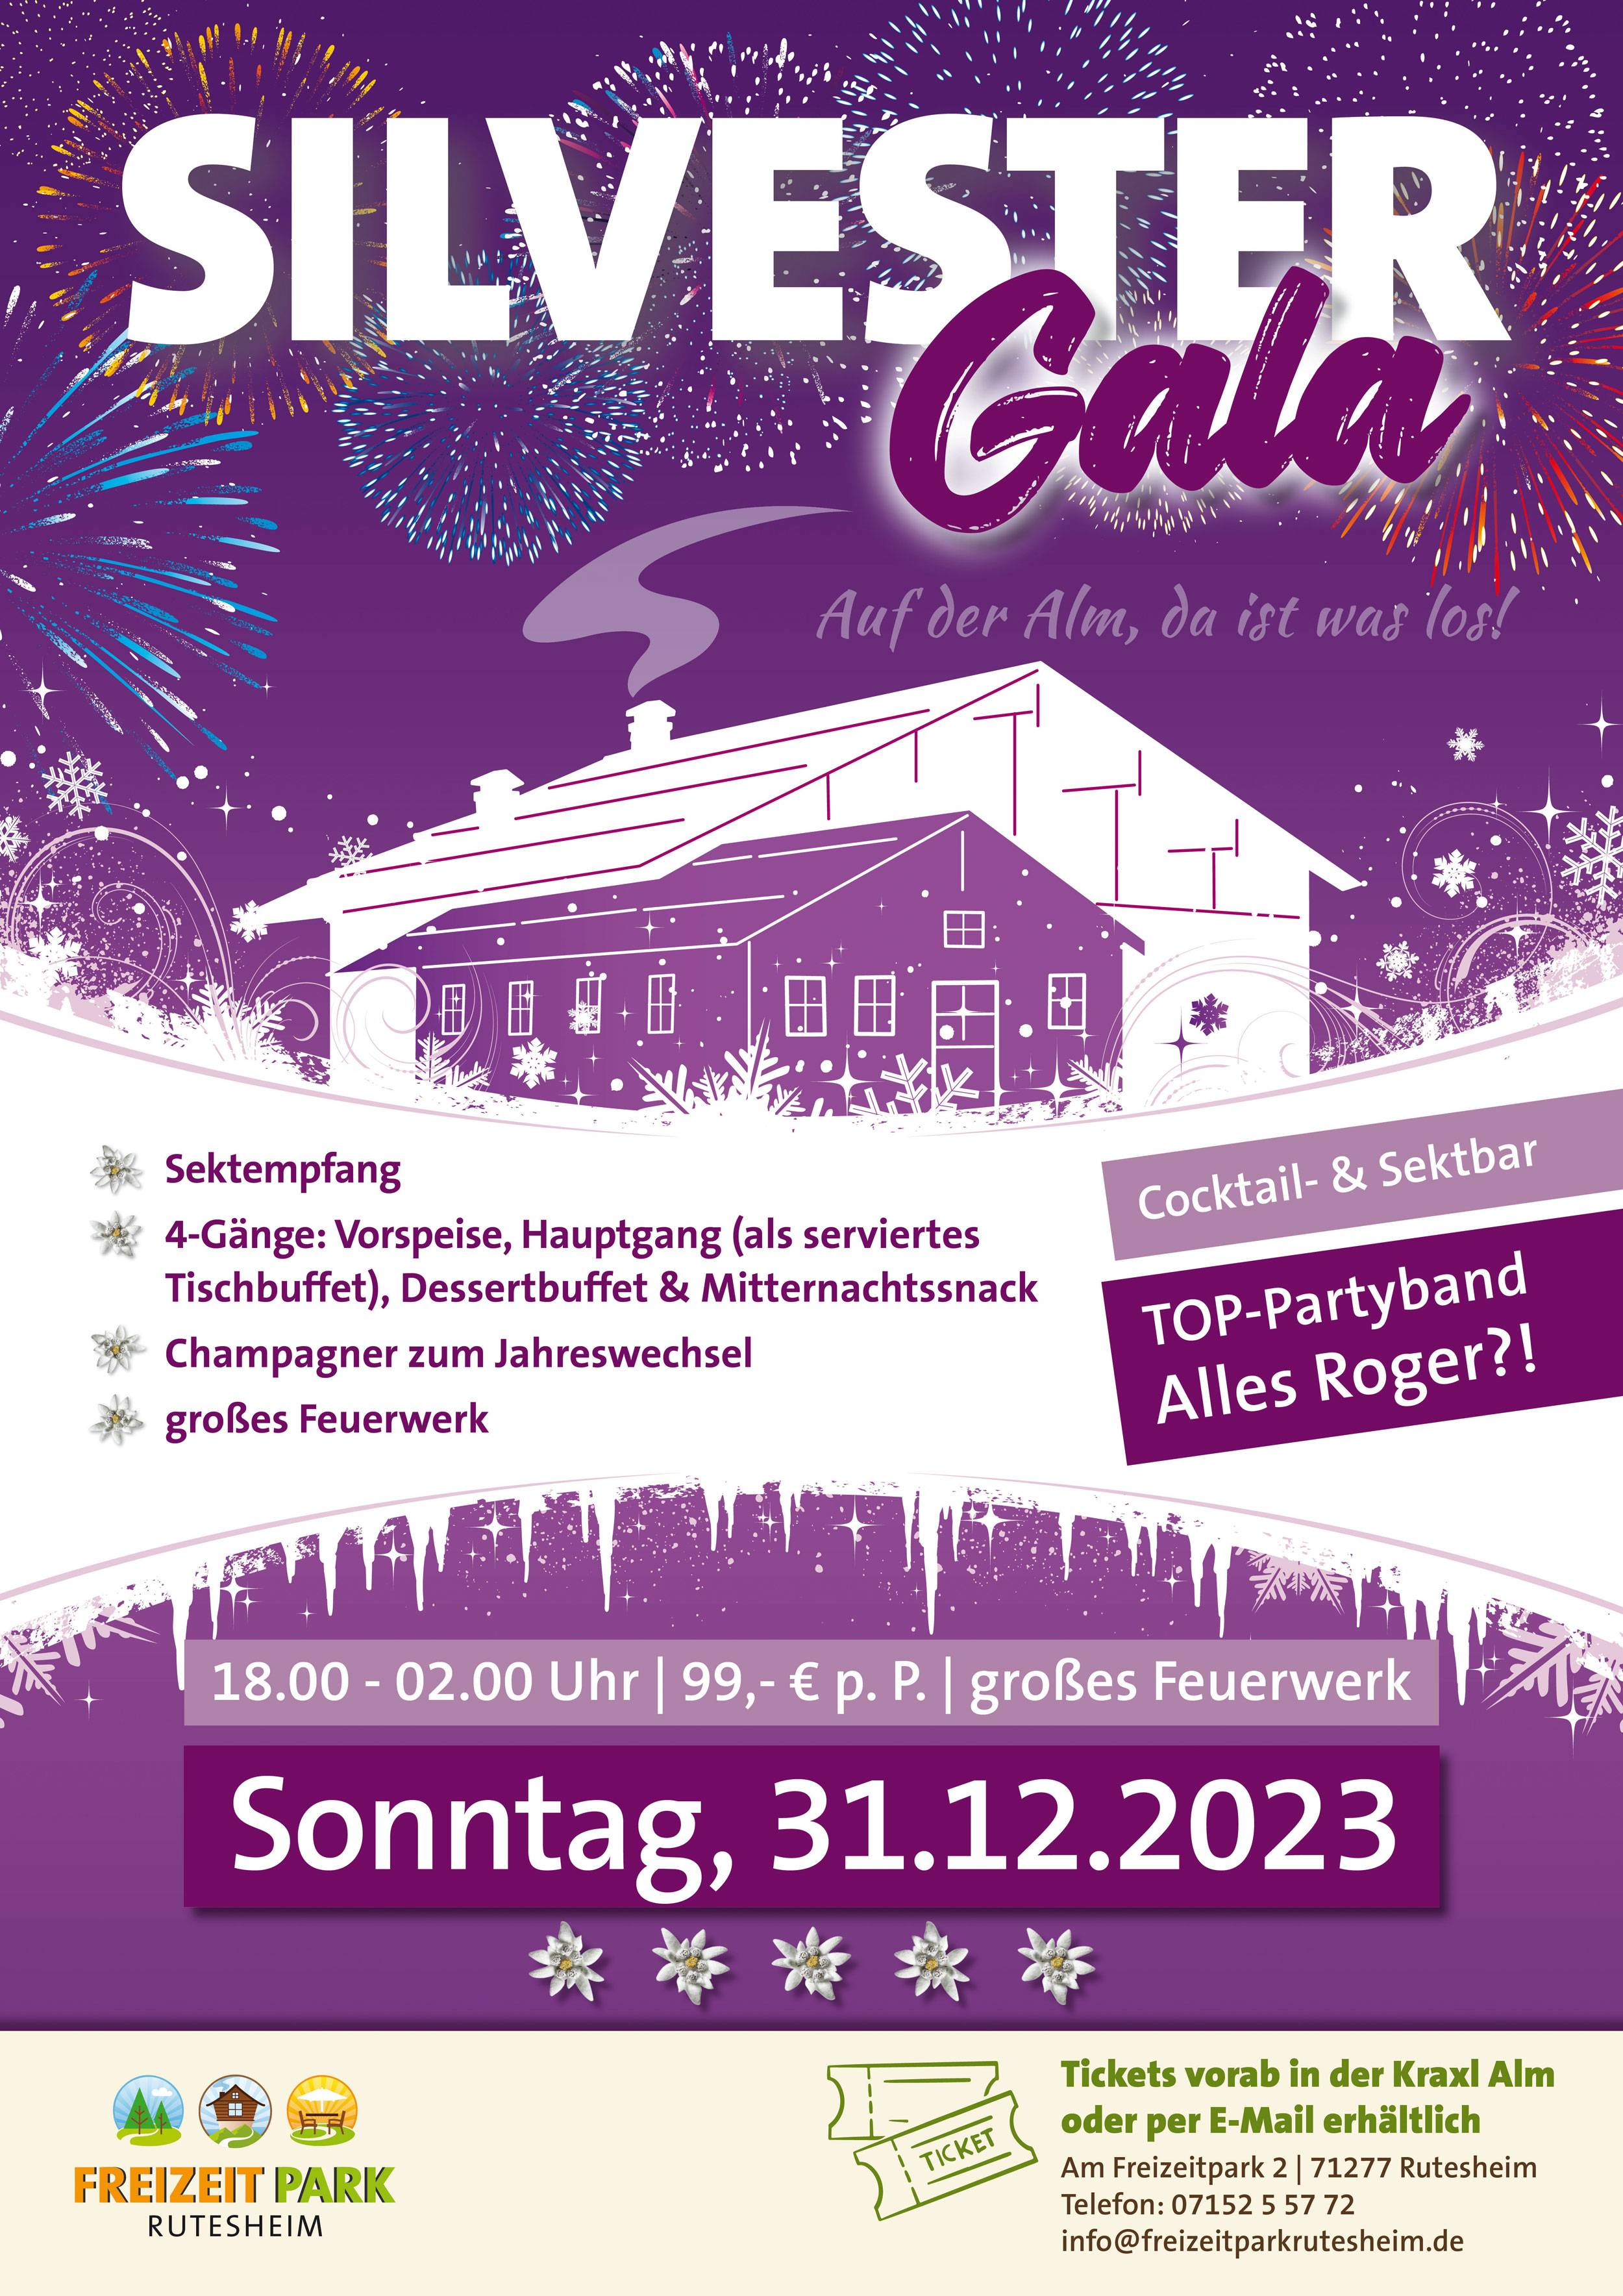 Silvester Gala - mit Party-Band "Alles Roger"